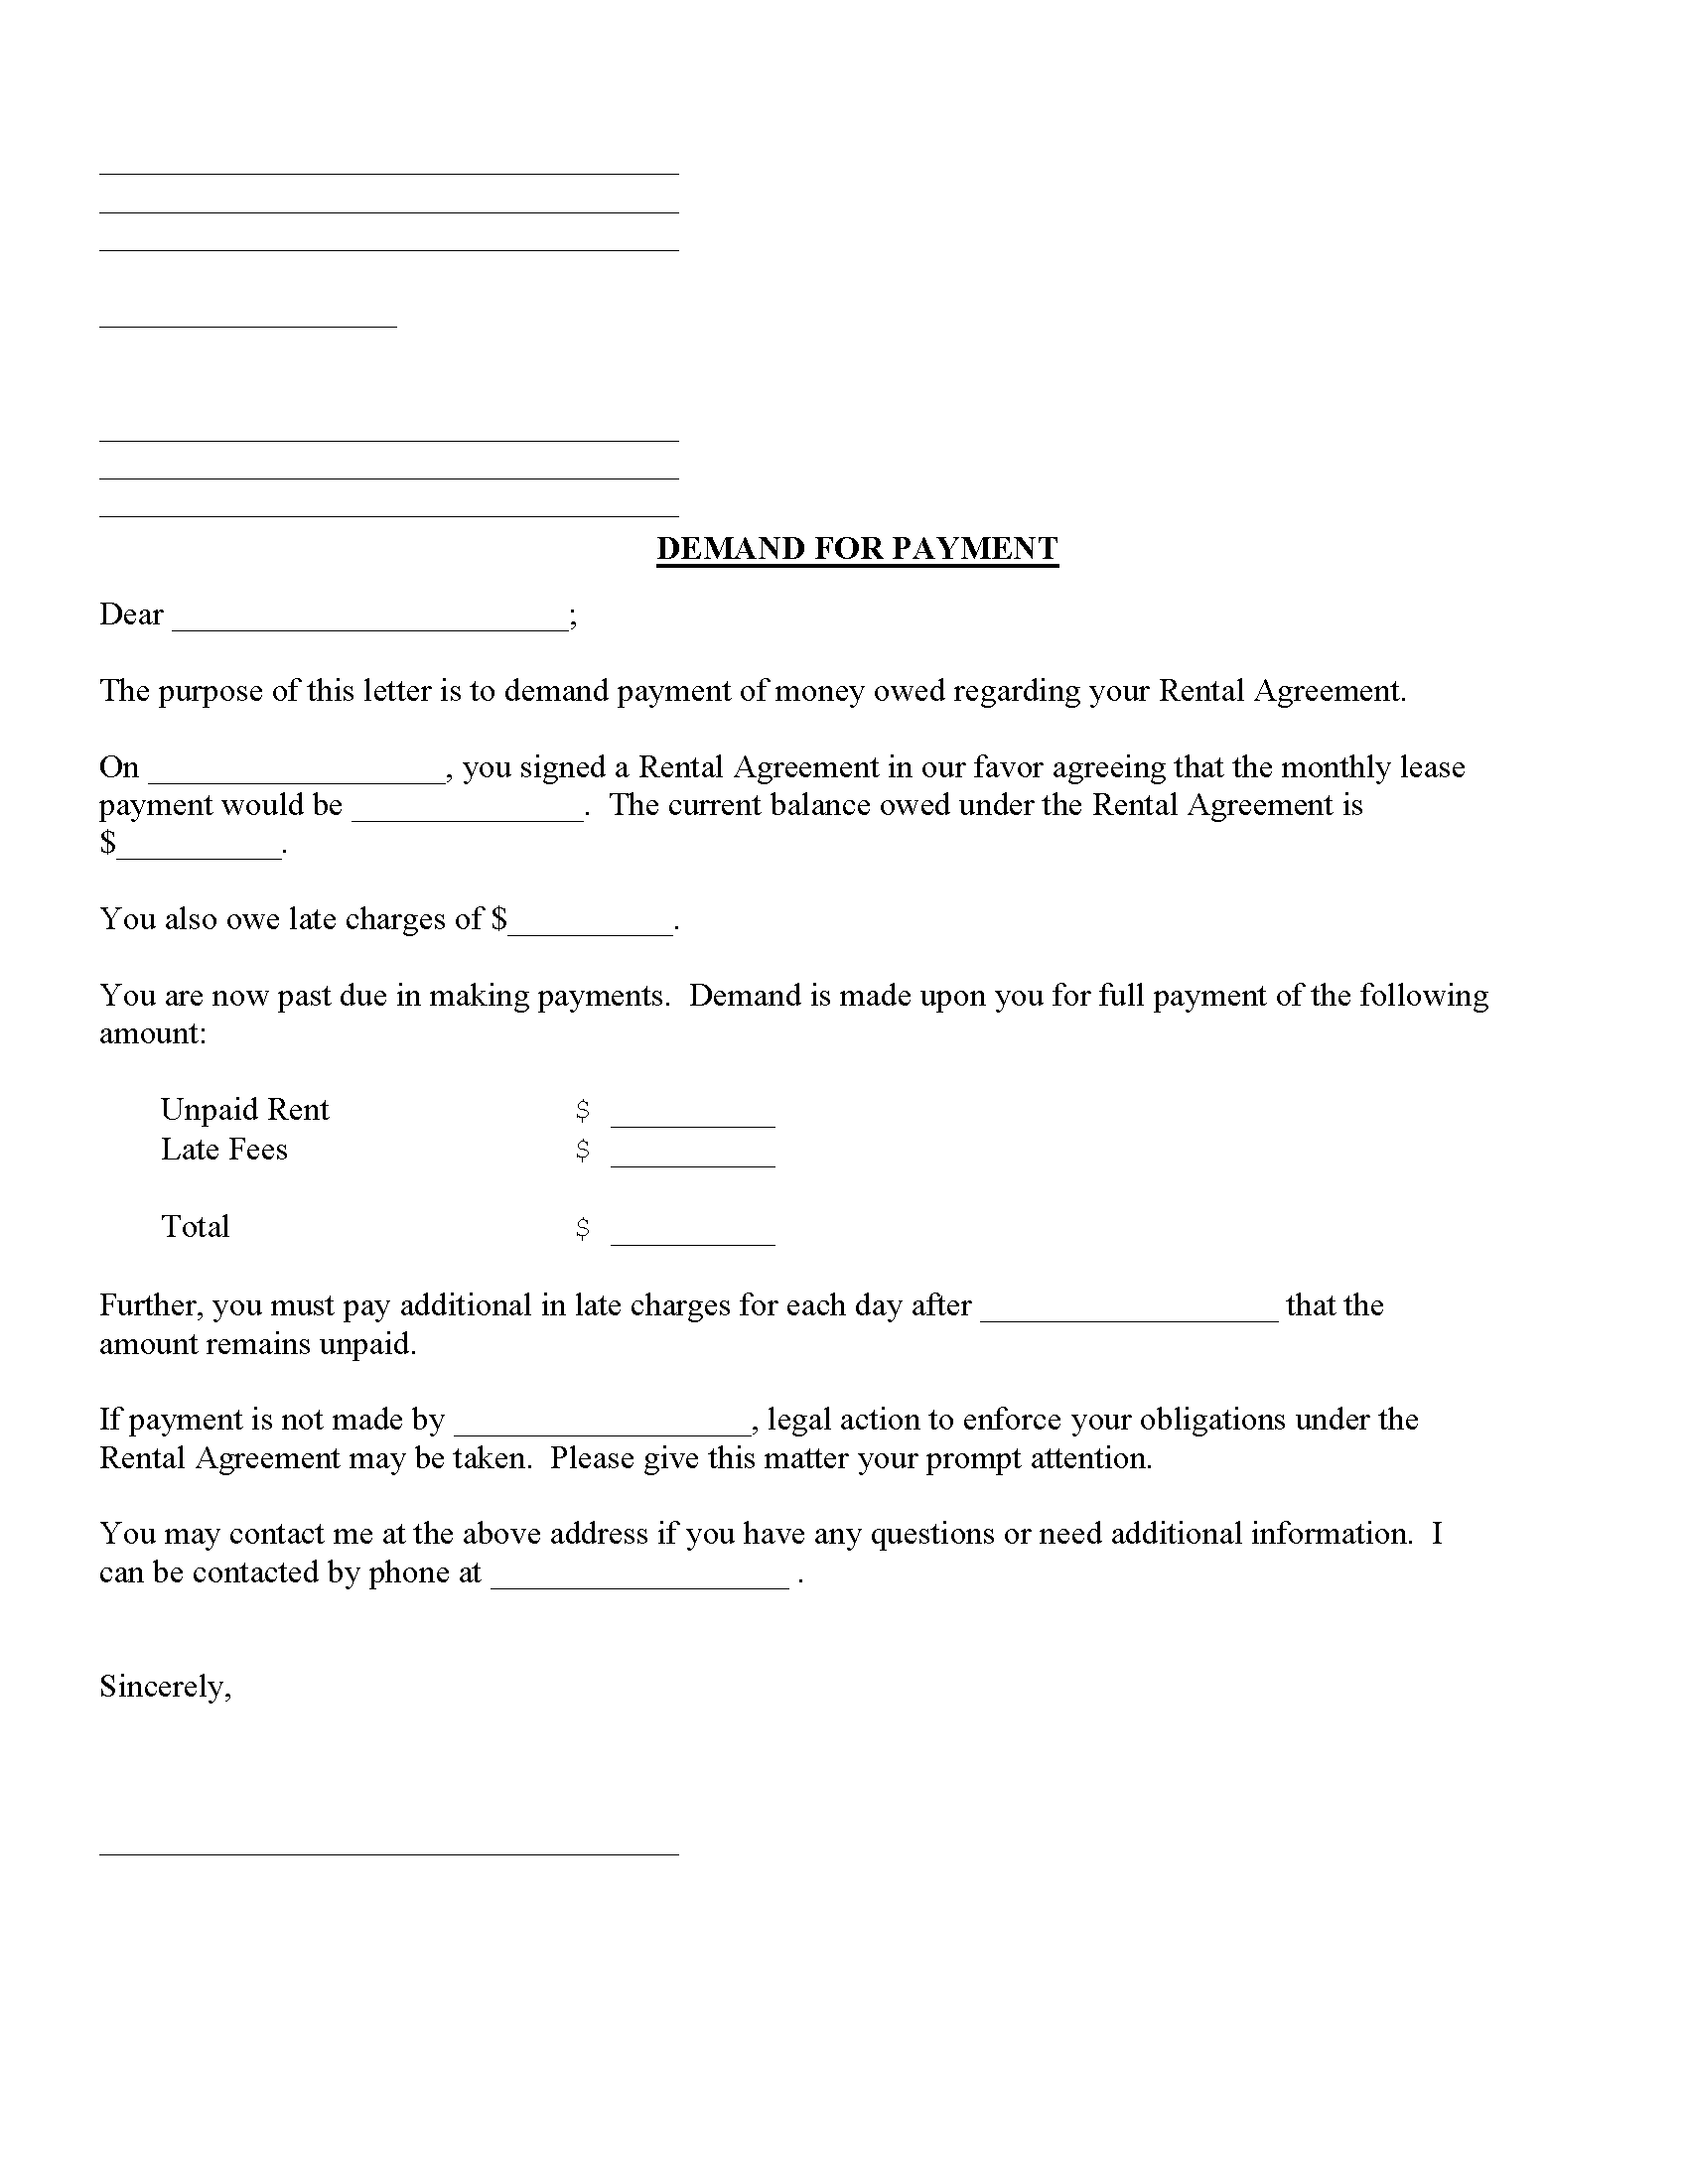 rent-demand-letter-pdf-form-fill-out-and-sign-printable-pdf-template